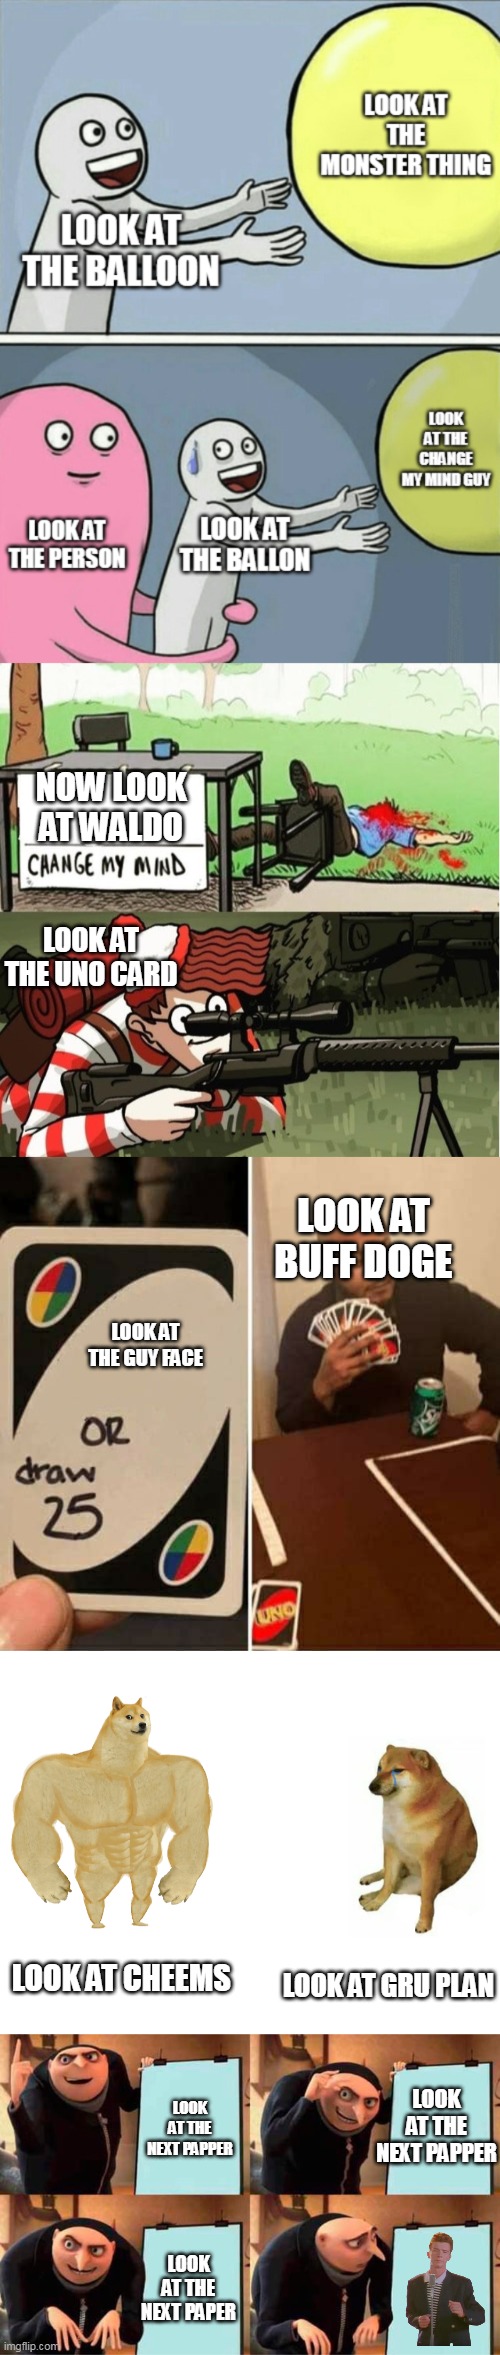 NOW LOOK AT WALDO; LOOK AT THE UNO CARD; LOOK AT BUFF DOGE; LOOK AT THE GUY FACE; LOOK AT CHEEMS; LOOK AT GRU PLAN; LOOK AT THE NEXT PAPPER; LOOK AT THE NEXT PAPPER; LOOK AT THE NEXT PAPER | image tagged in waldo shoots the change my mind guy,memes,uno draw 25 cards,buff doge vs cheems,gru's plan | made w/ Imgflip meme maker